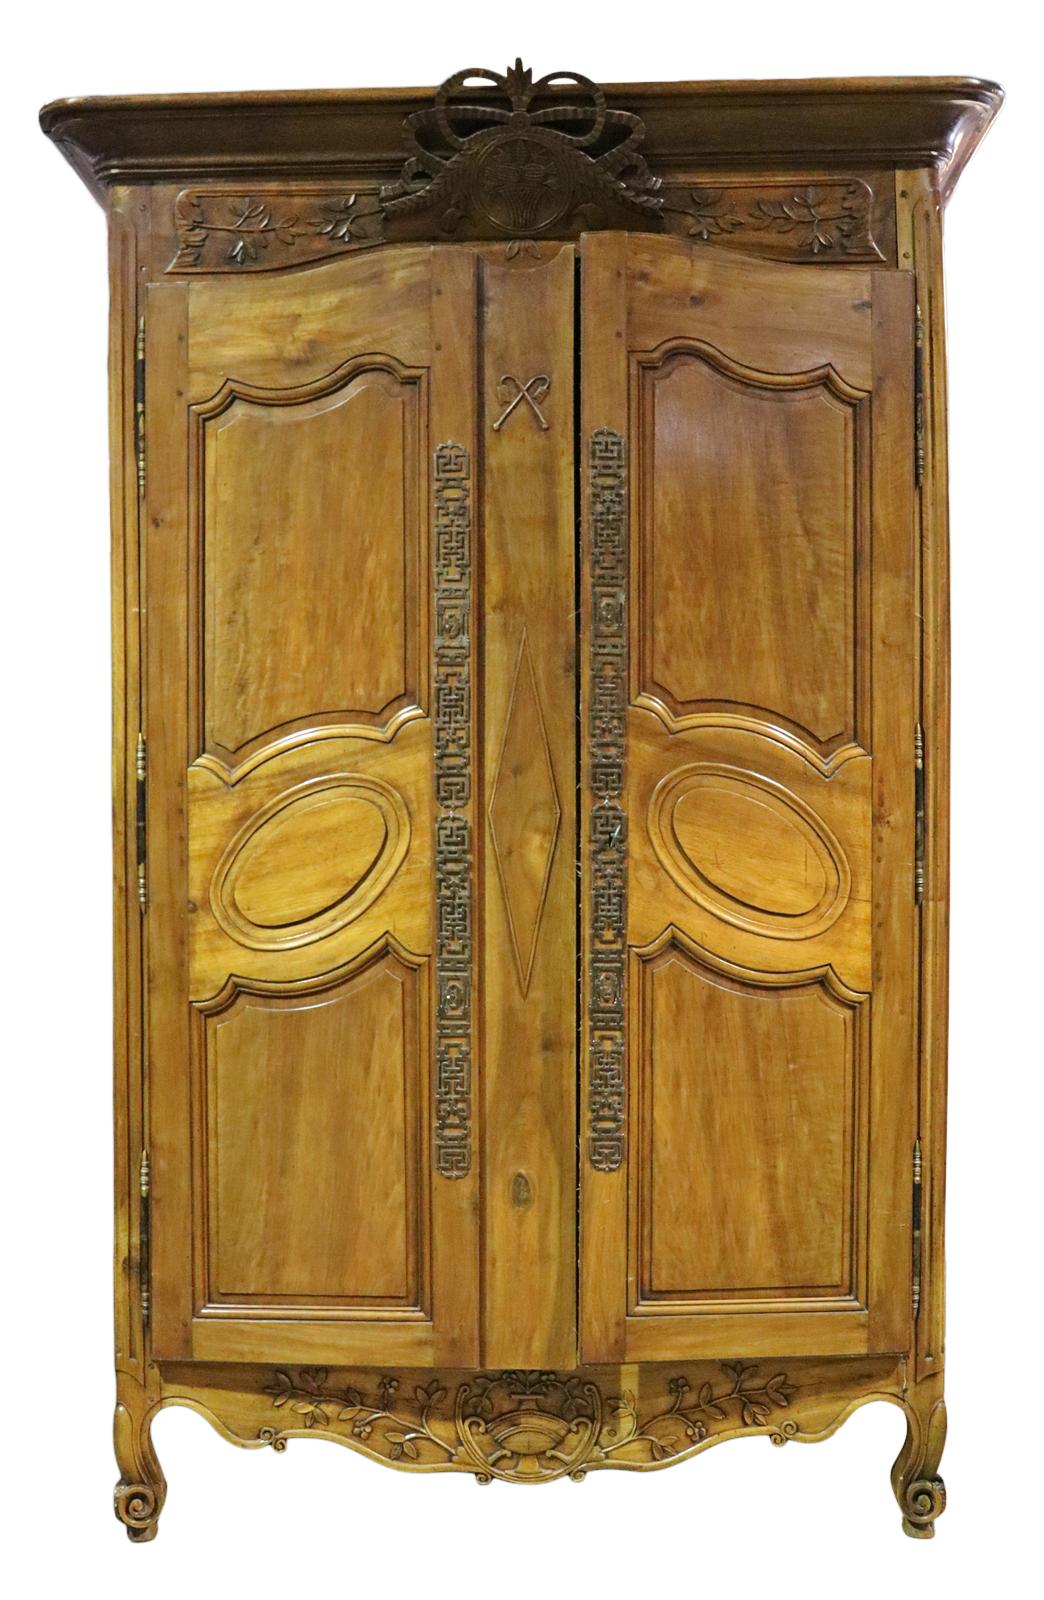 Carved wood. Two doors containing two shelves. Metal accents. Measures: 101